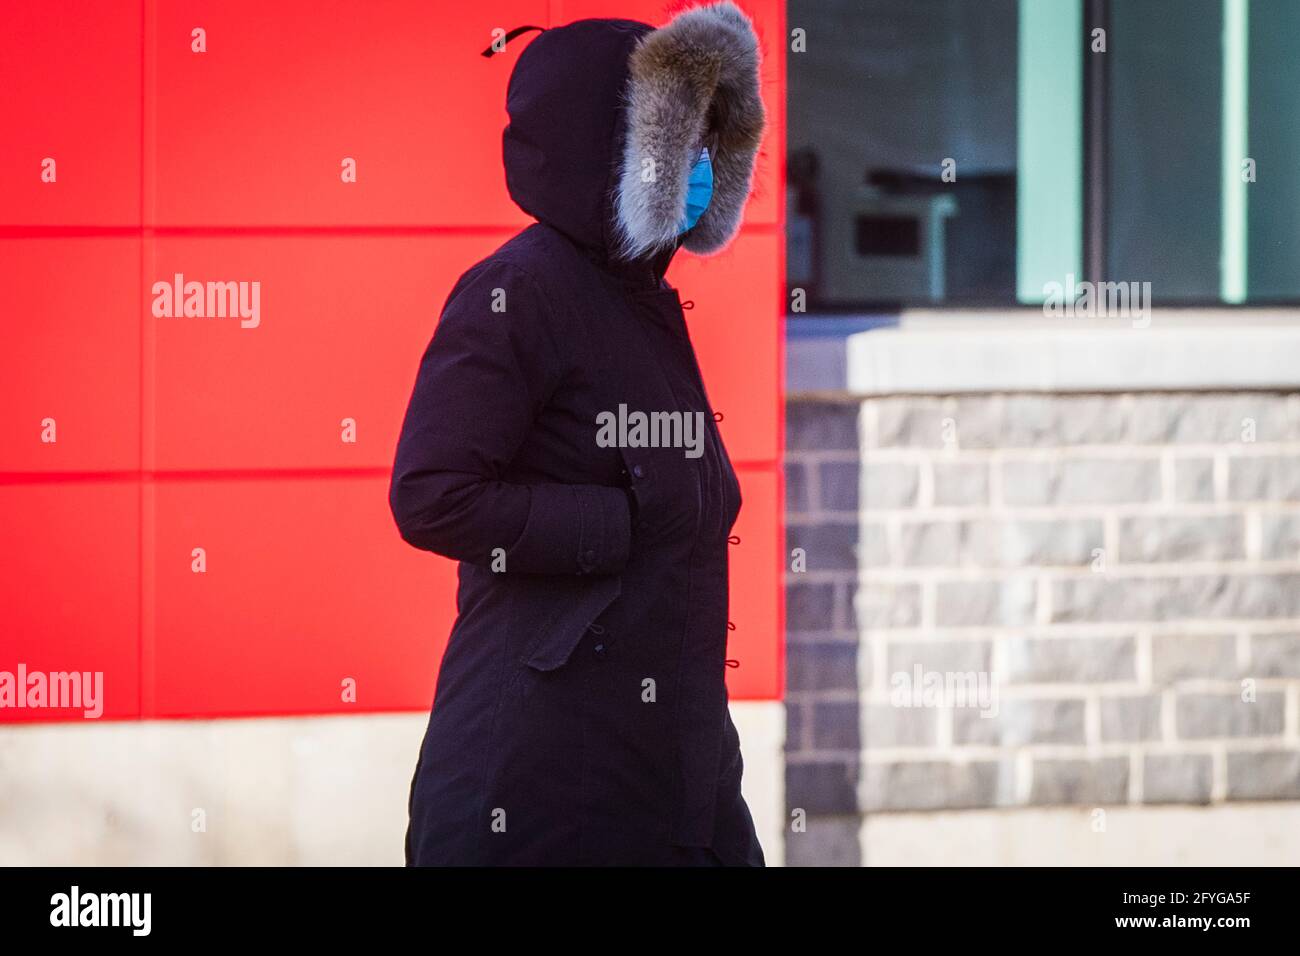 A person wears a mask in Kingston, Ontario on Friday, January 8, 2021, as the COVID-19 pandemic continues across Canada and around the world. Stock Photo